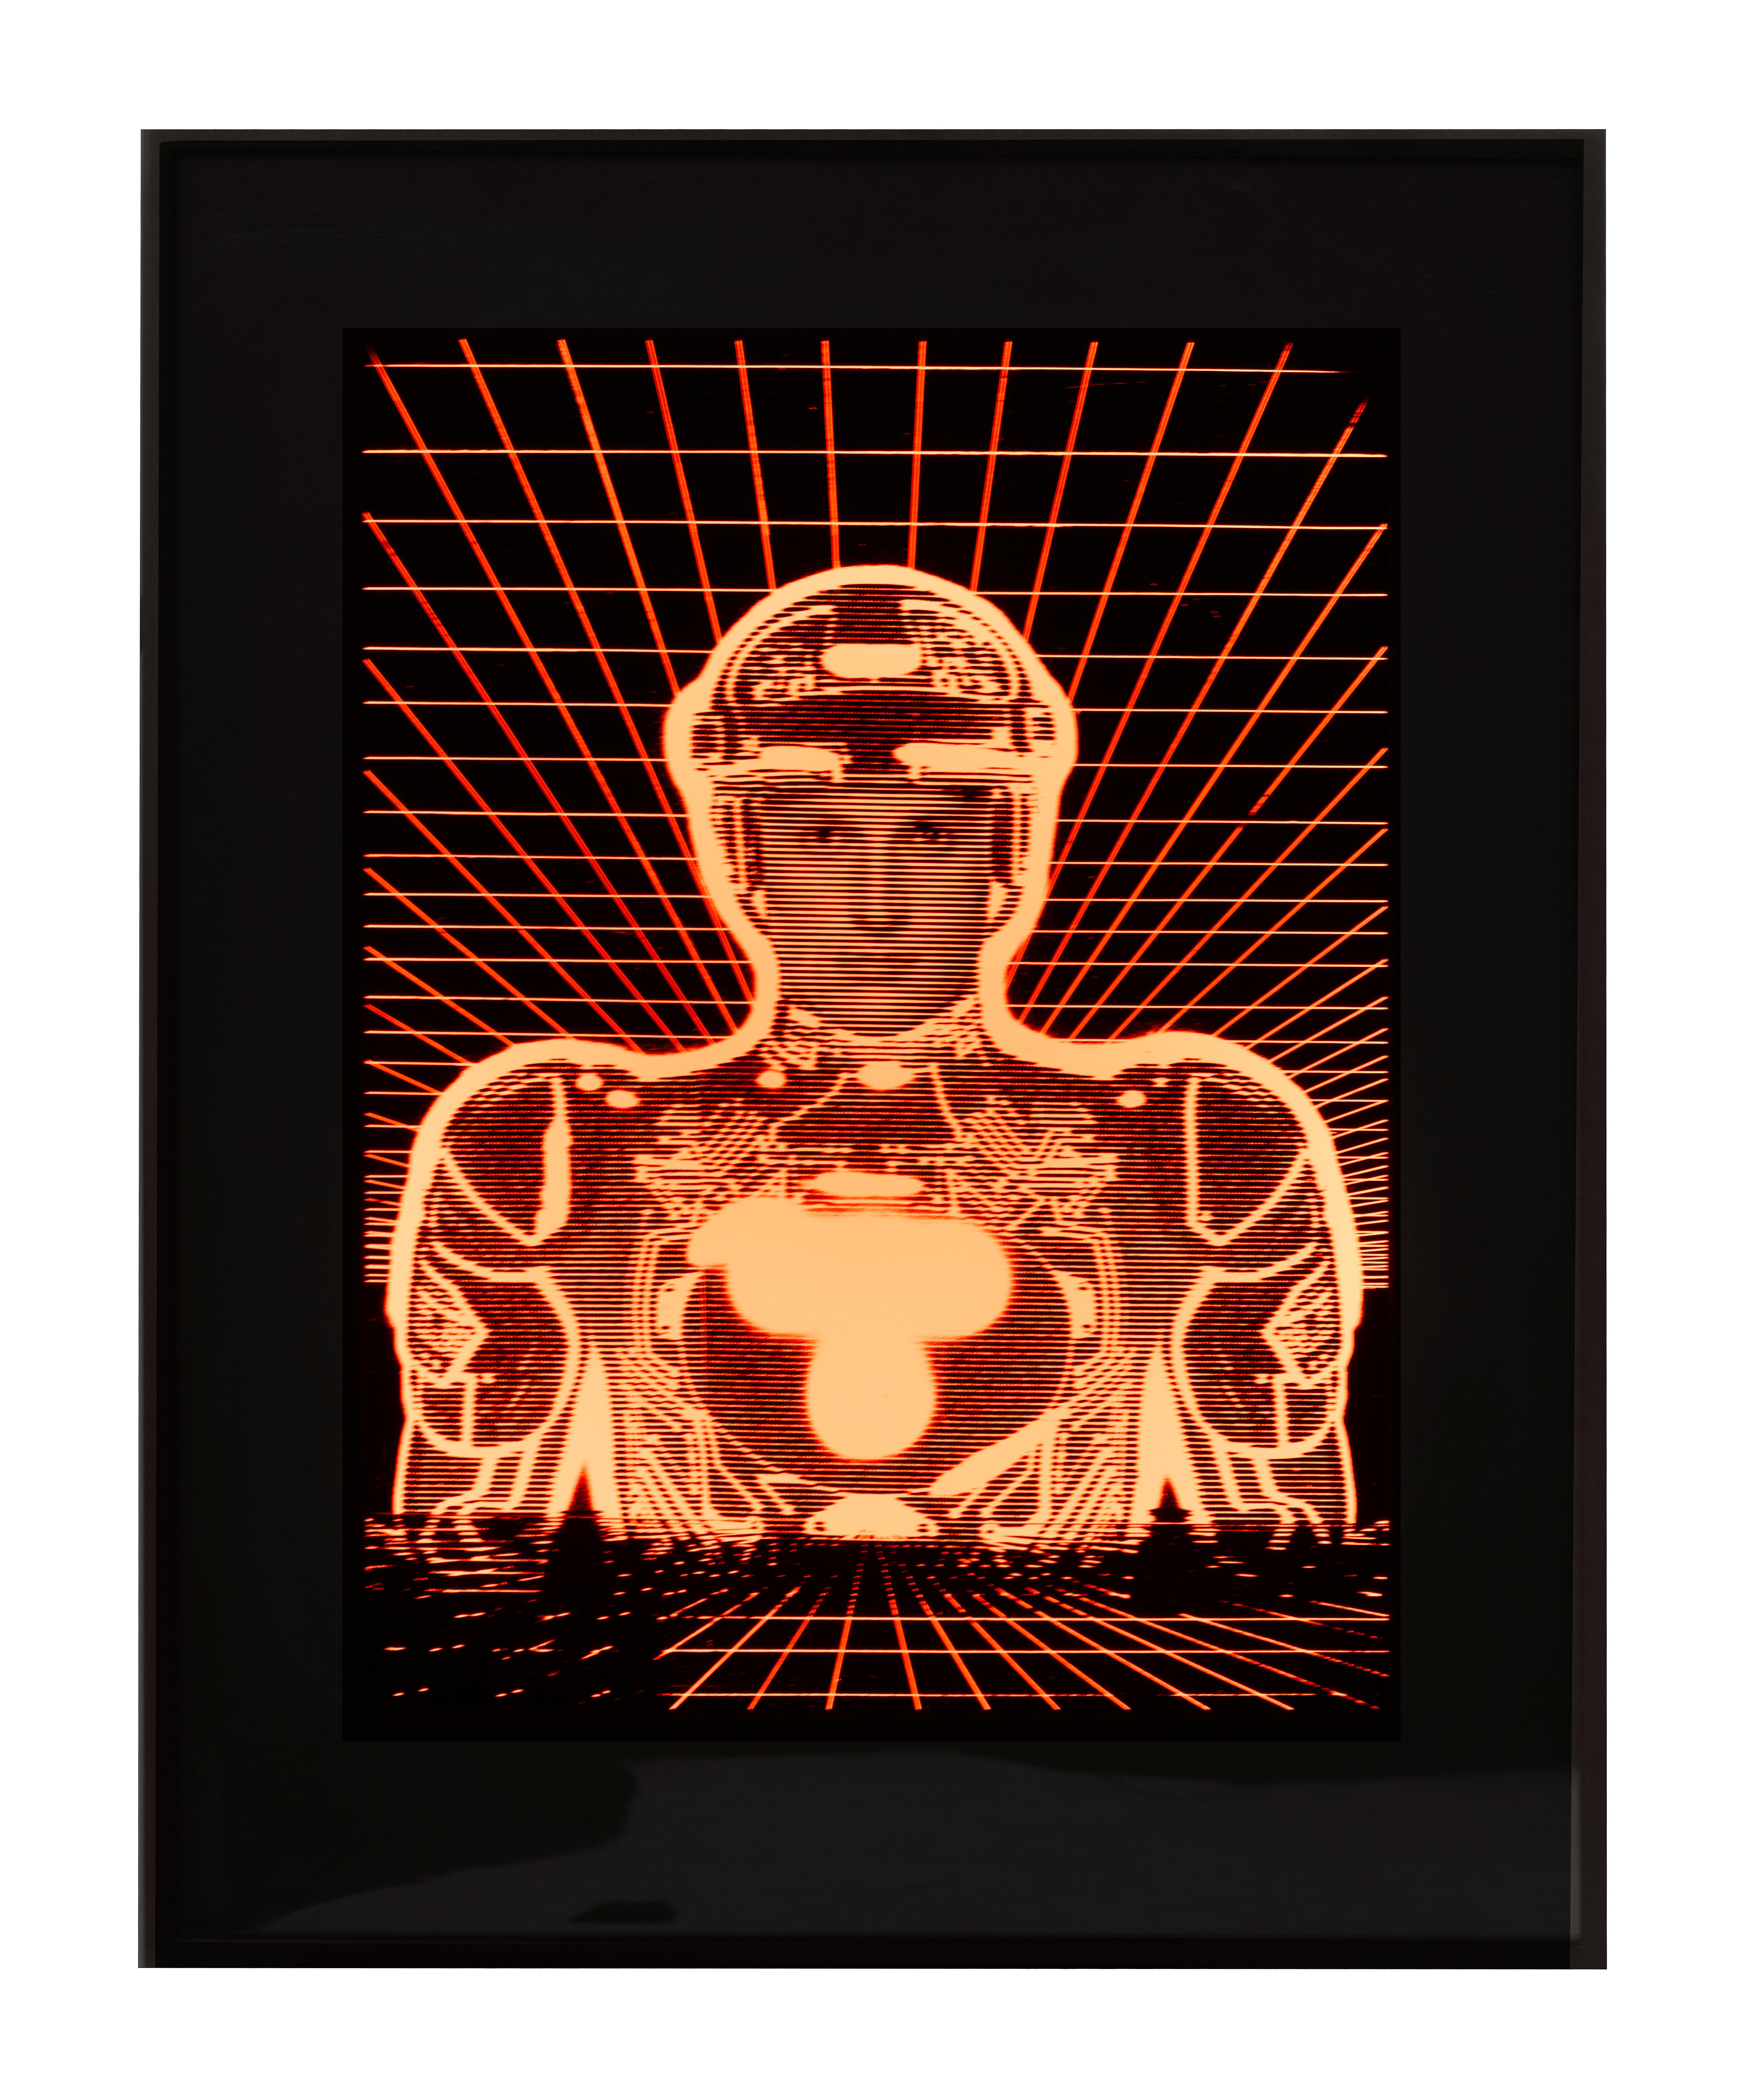 Preliminary mixed-media artwork for the 1982 film Tron. This American science fiction film was written and directed by Steven Lisberger from a story by Lisberger and Bonnie MacBird, and stars Jeff Bridges. The techniques used in making the film were